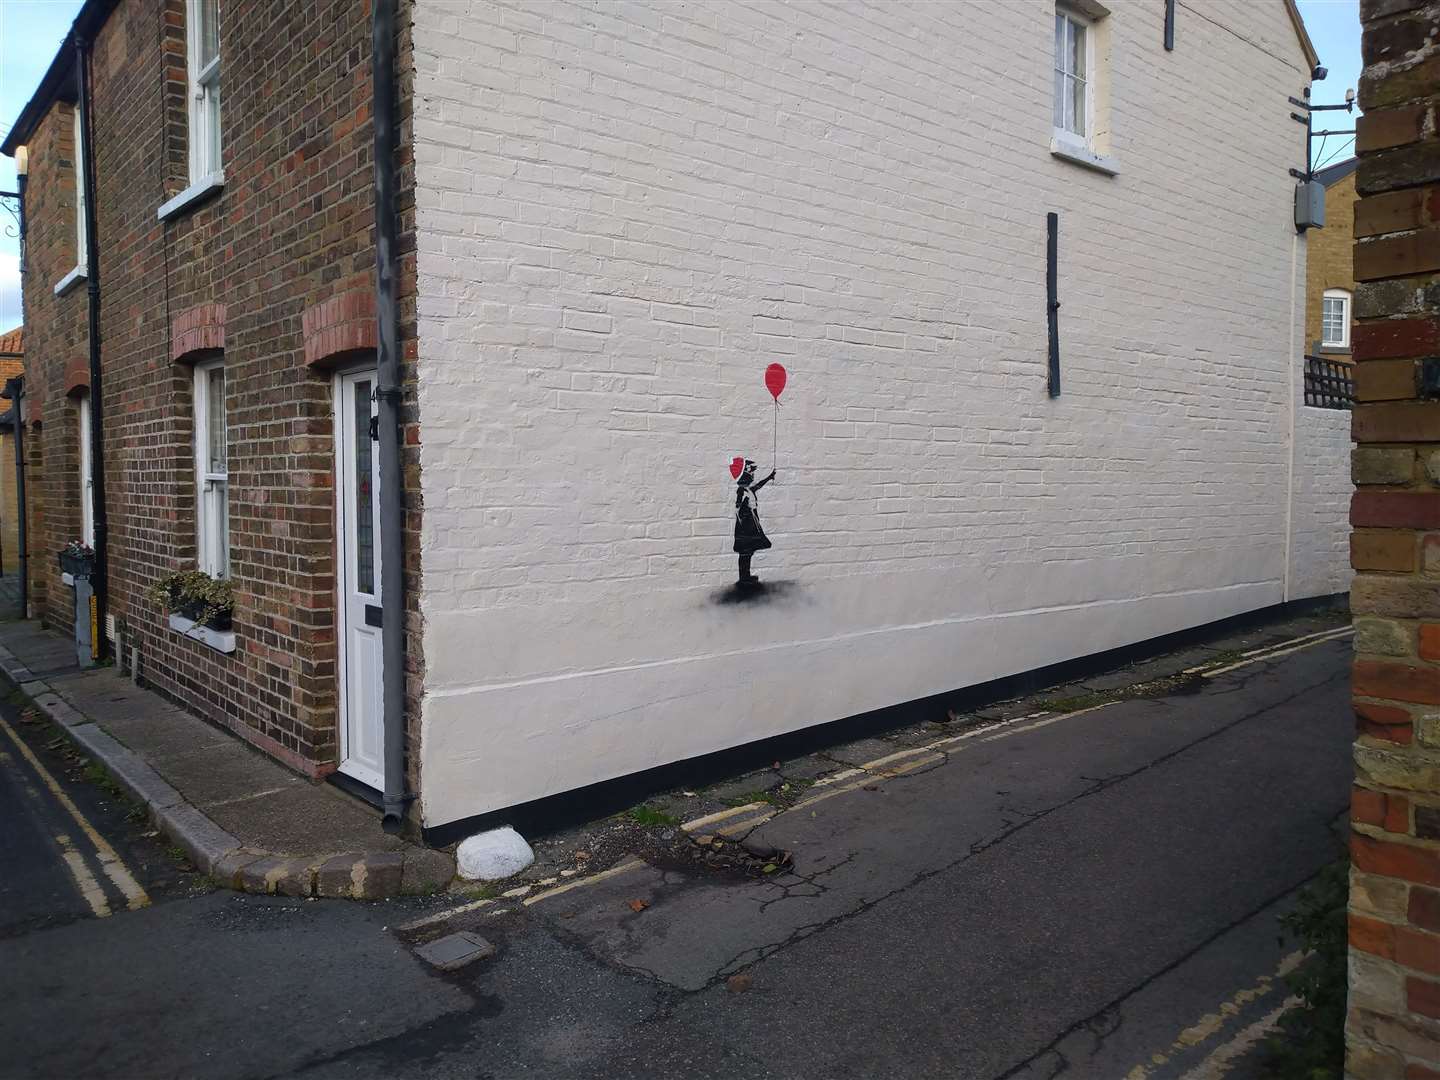 'Banksy' artwork was also spotted in Sandwich